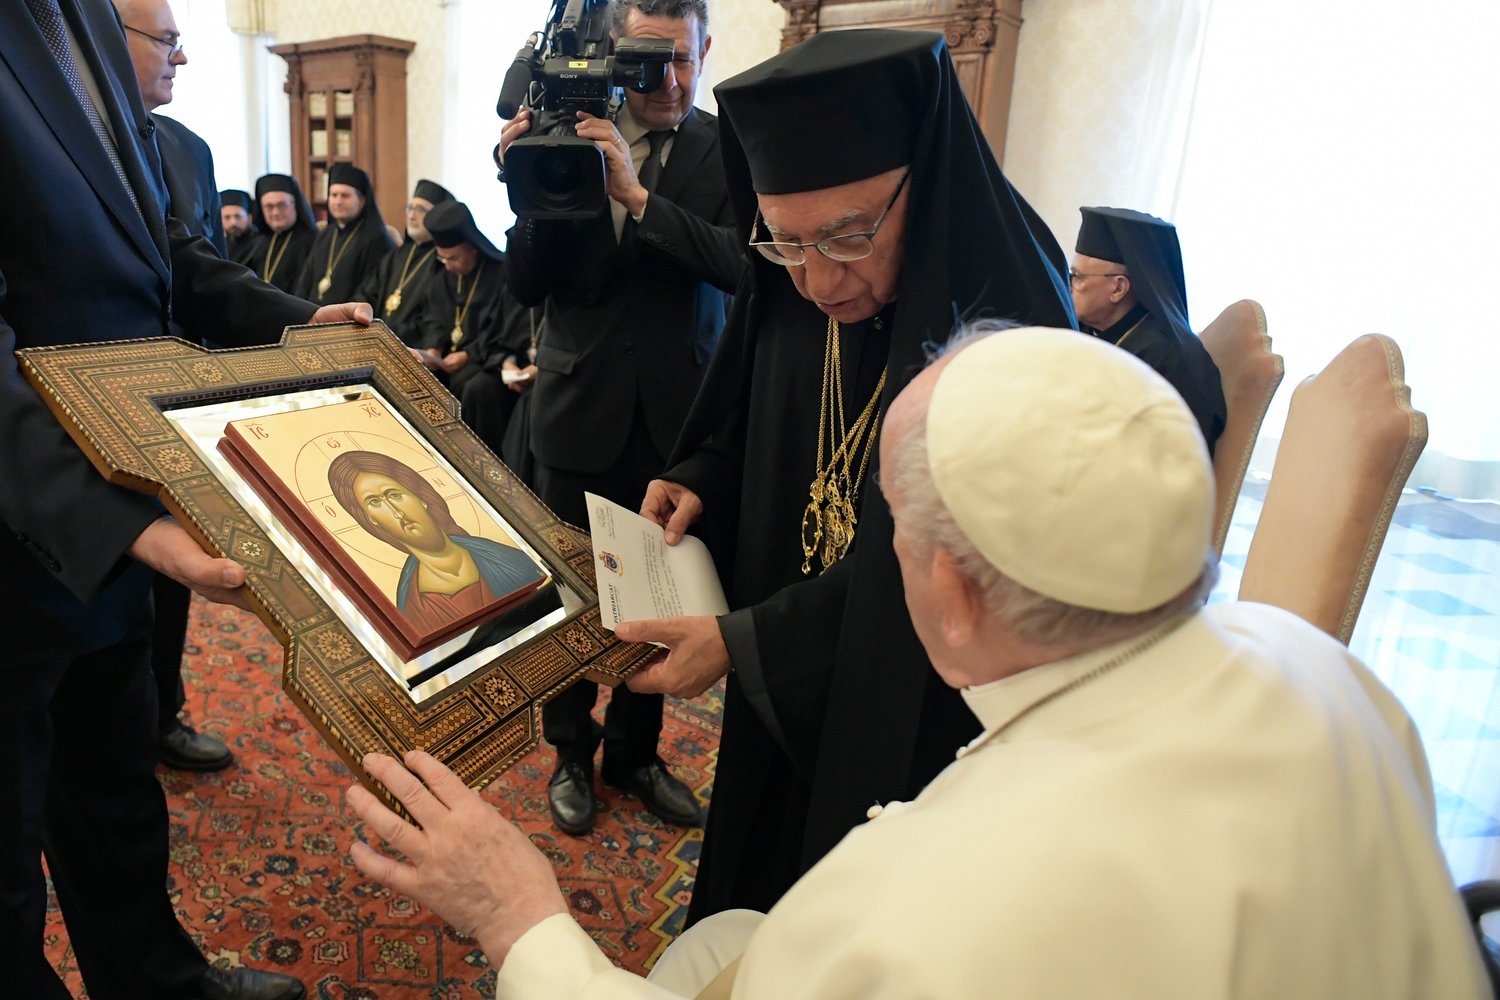 Pope Francis accepts an icon from Melkite Patriarch Joseph Absi during an audience with members of the synod of the Melkite Catholic Church at the Vatican June 20.